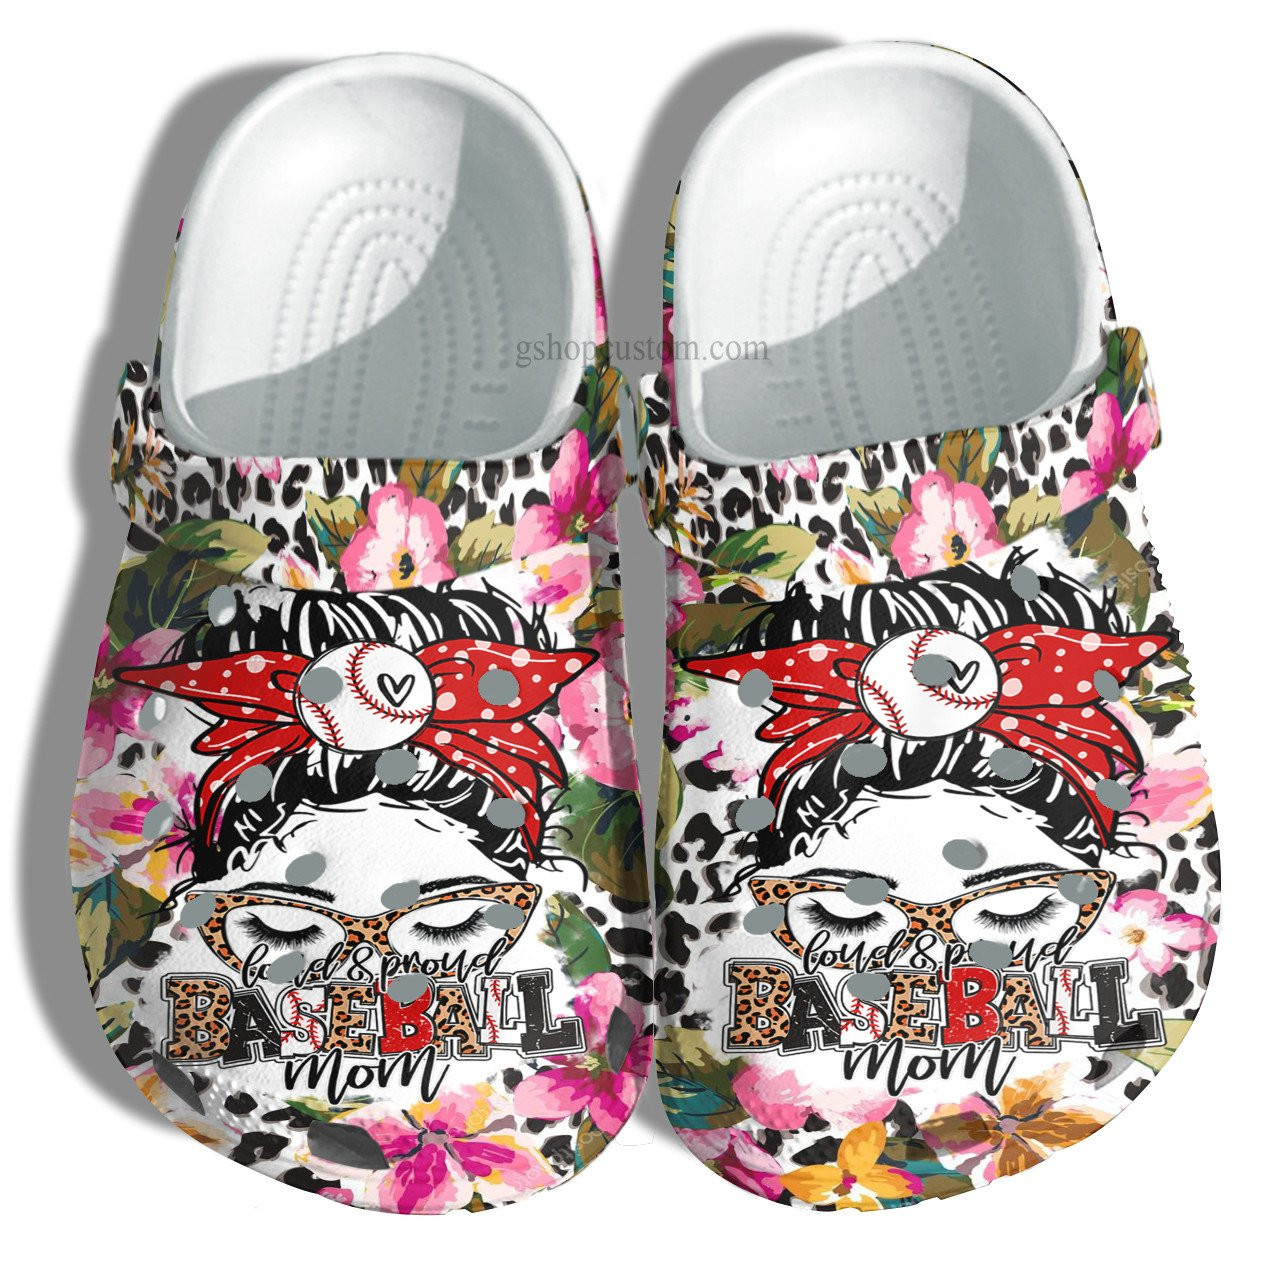 Baseball Mom Flower Cow Crocs Shoes For Wife Mom Grandma - Baseball Mom Cow Shoes Croc Clogs